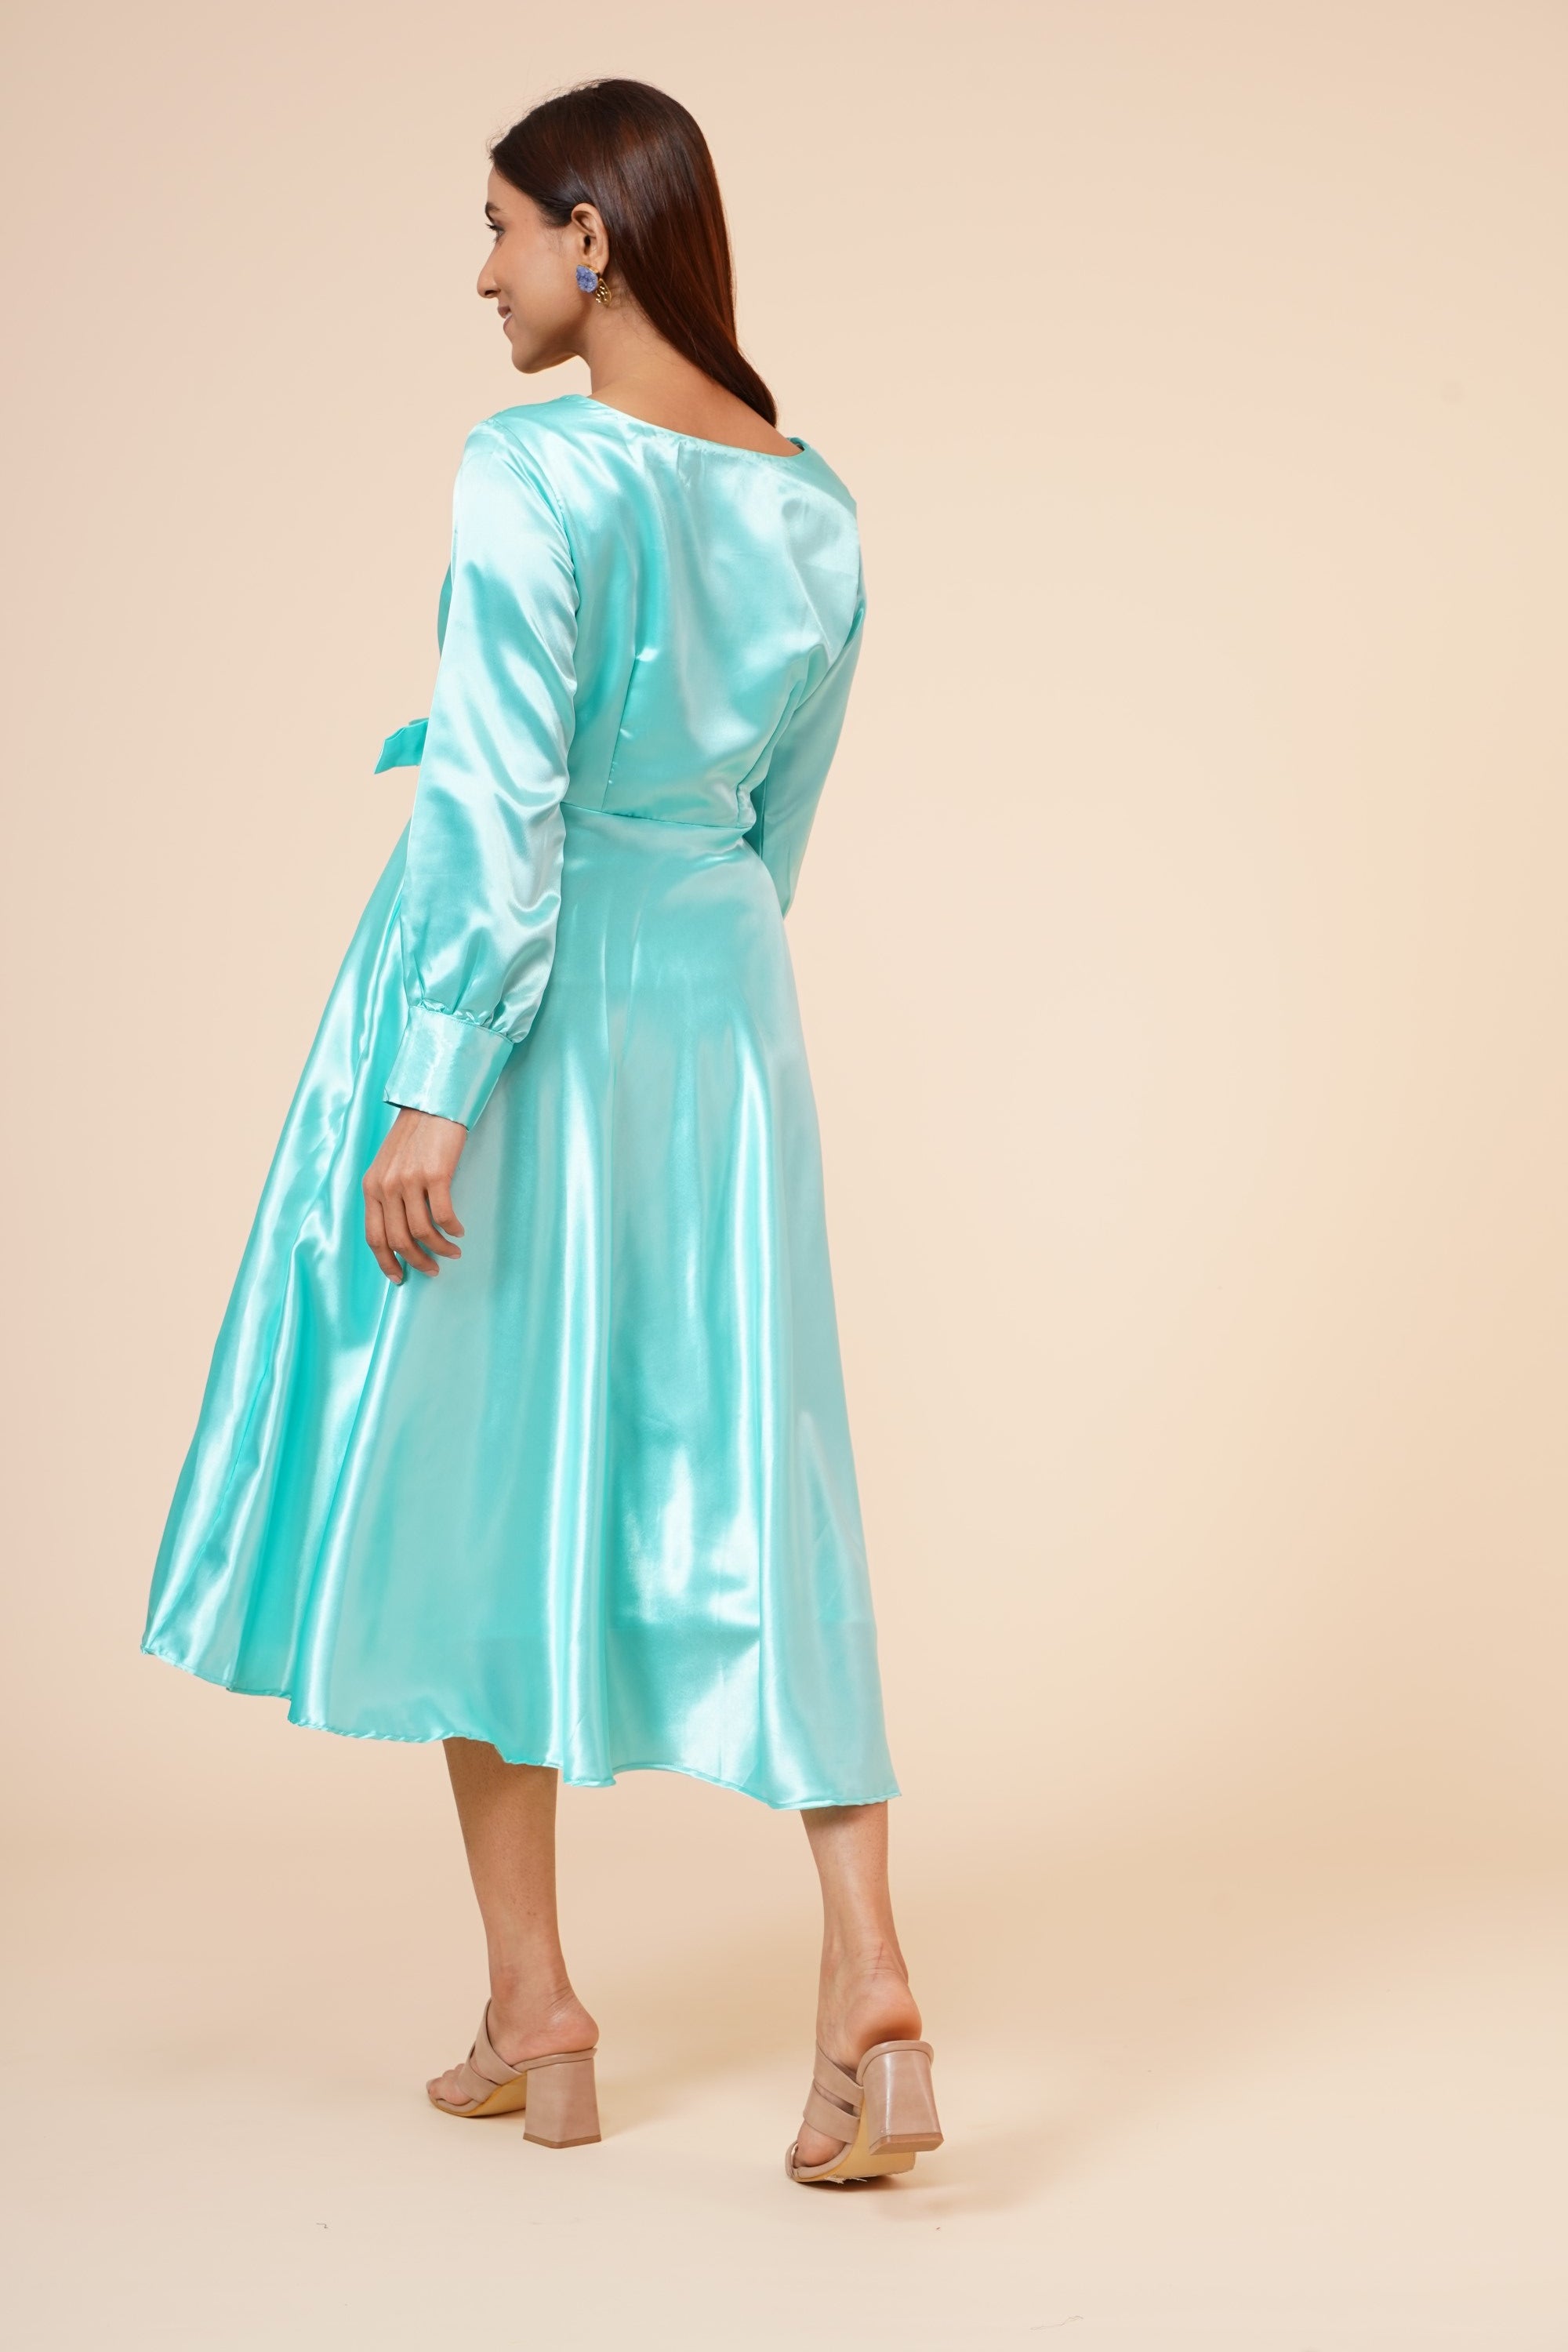 Women's Empire Line With Cuff Satin Wrap Dress Sky Blue - MIRACOLOS by Ruchi